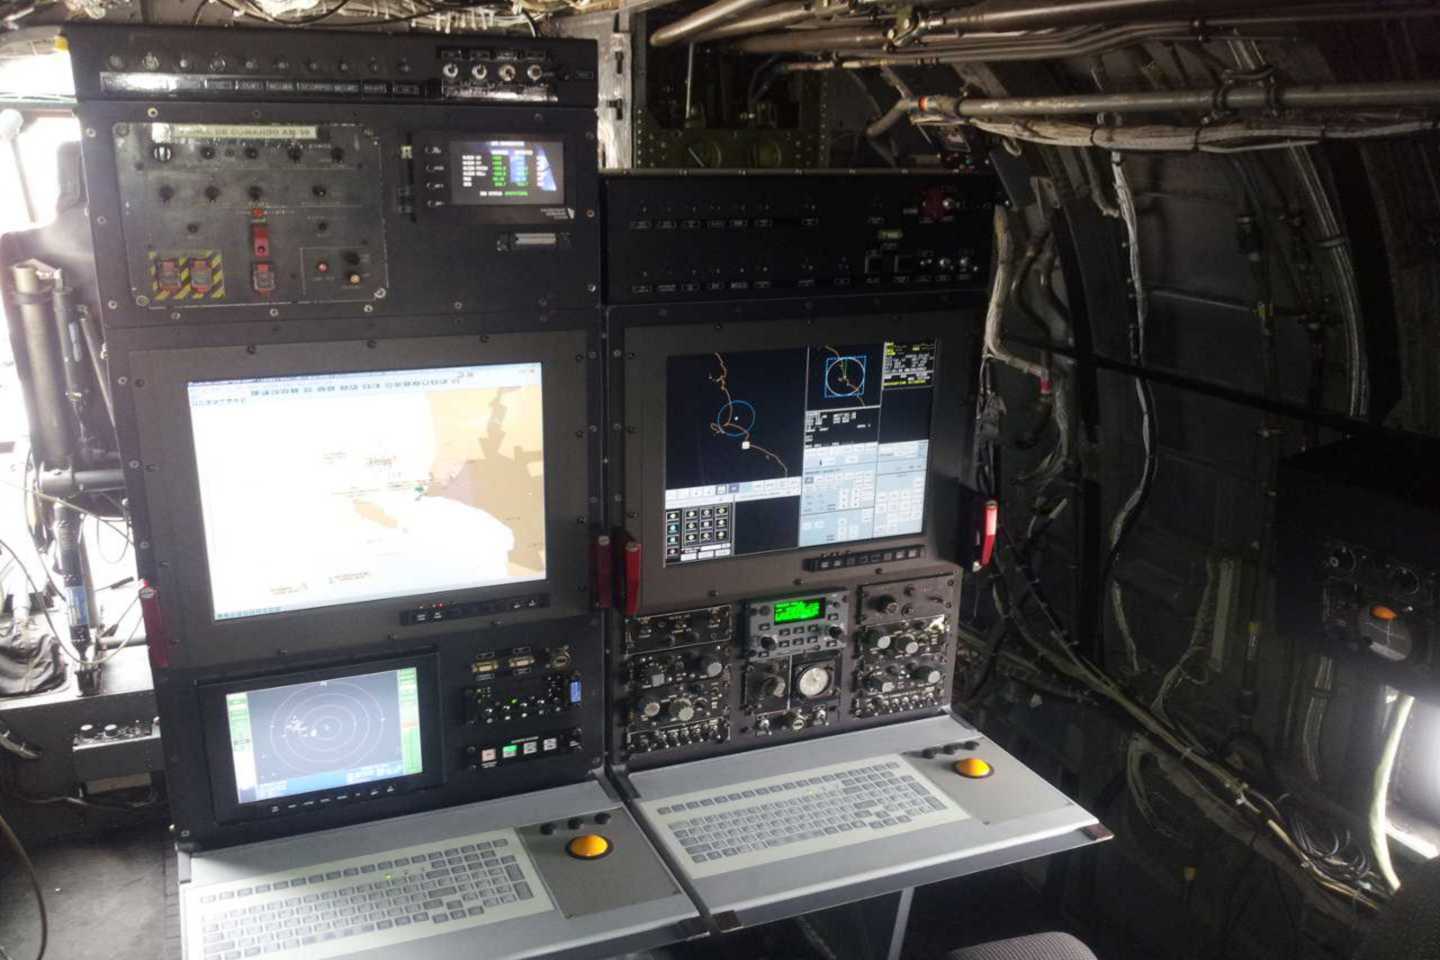 An example of a scorpio mission system installed on an aircraft.